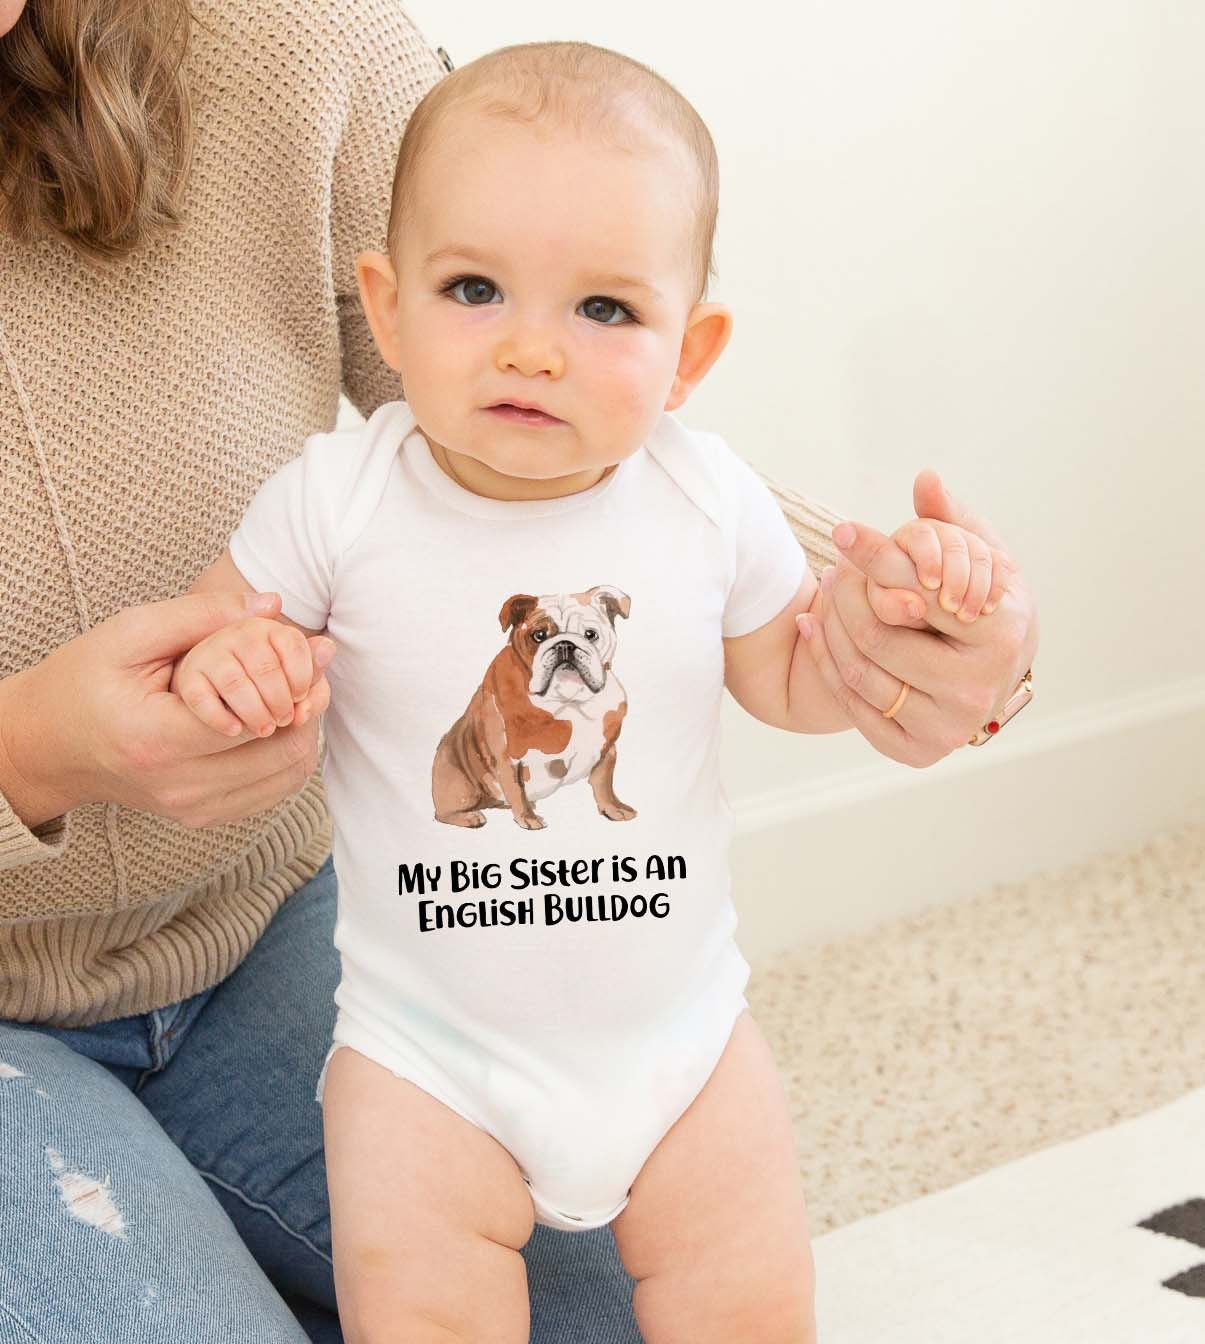 Organic Cotton Baby Clothes Dog Themed Baby Shower Gift For Girls Boys Newborn Coming Home Outfit Unisex English Bulldog Baby Leggings Kleding Unisex kinderkleding Unisex babykleding Broek 